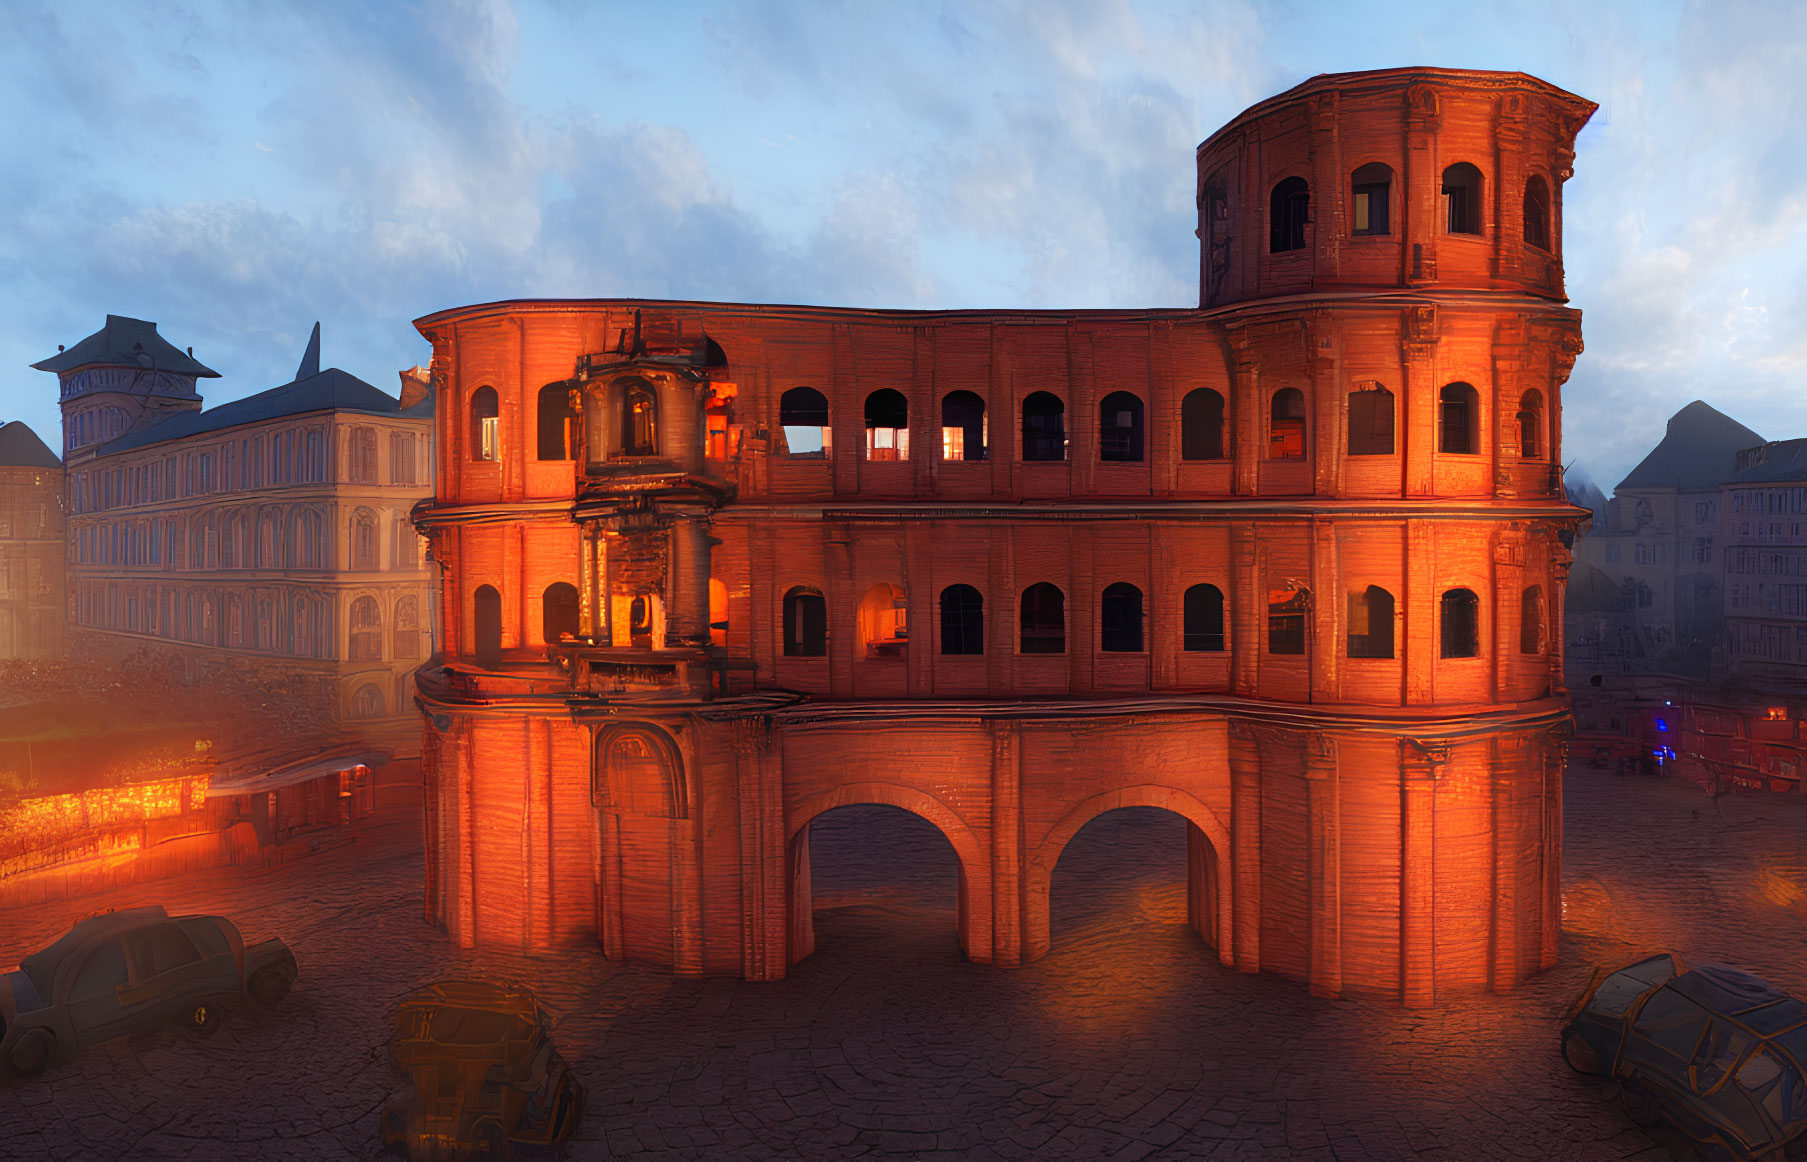 Ancient Roman structure resembling Colosseum at dusk with vintage cars and classical buildings under blue sky